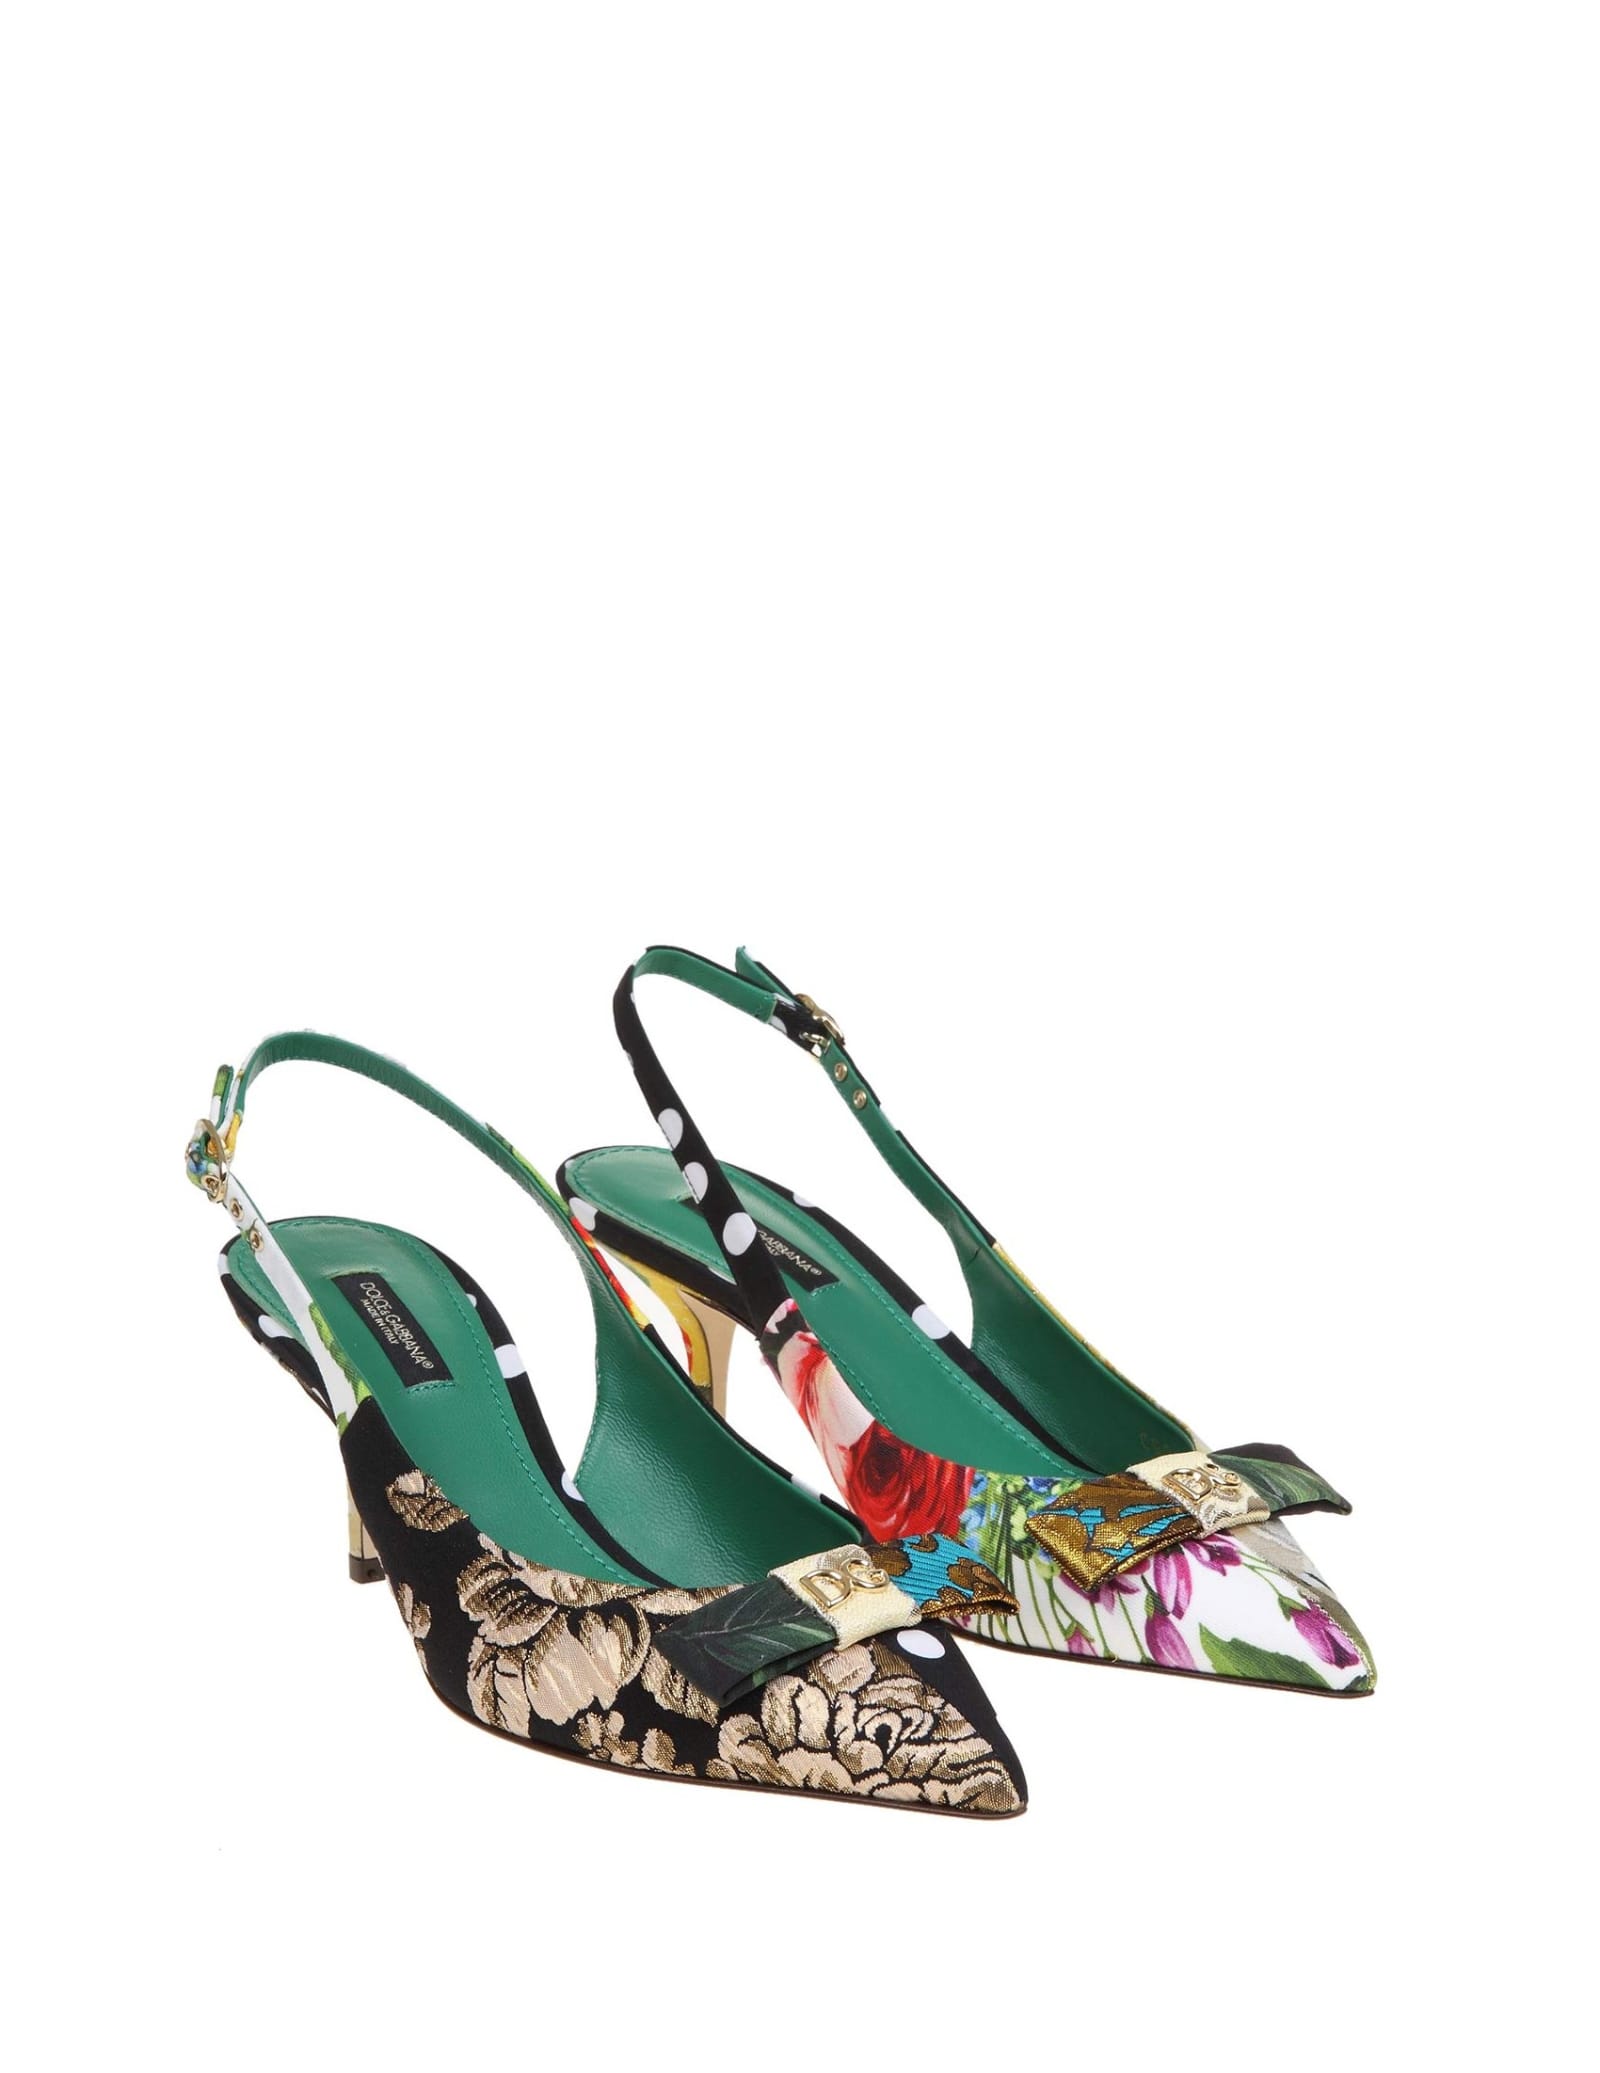 Buy Dolce & Gabbana Decollete Slingback Patch 3 In Patchwork Fabric online, shop Dolce & Gabbana shoes with free shipping